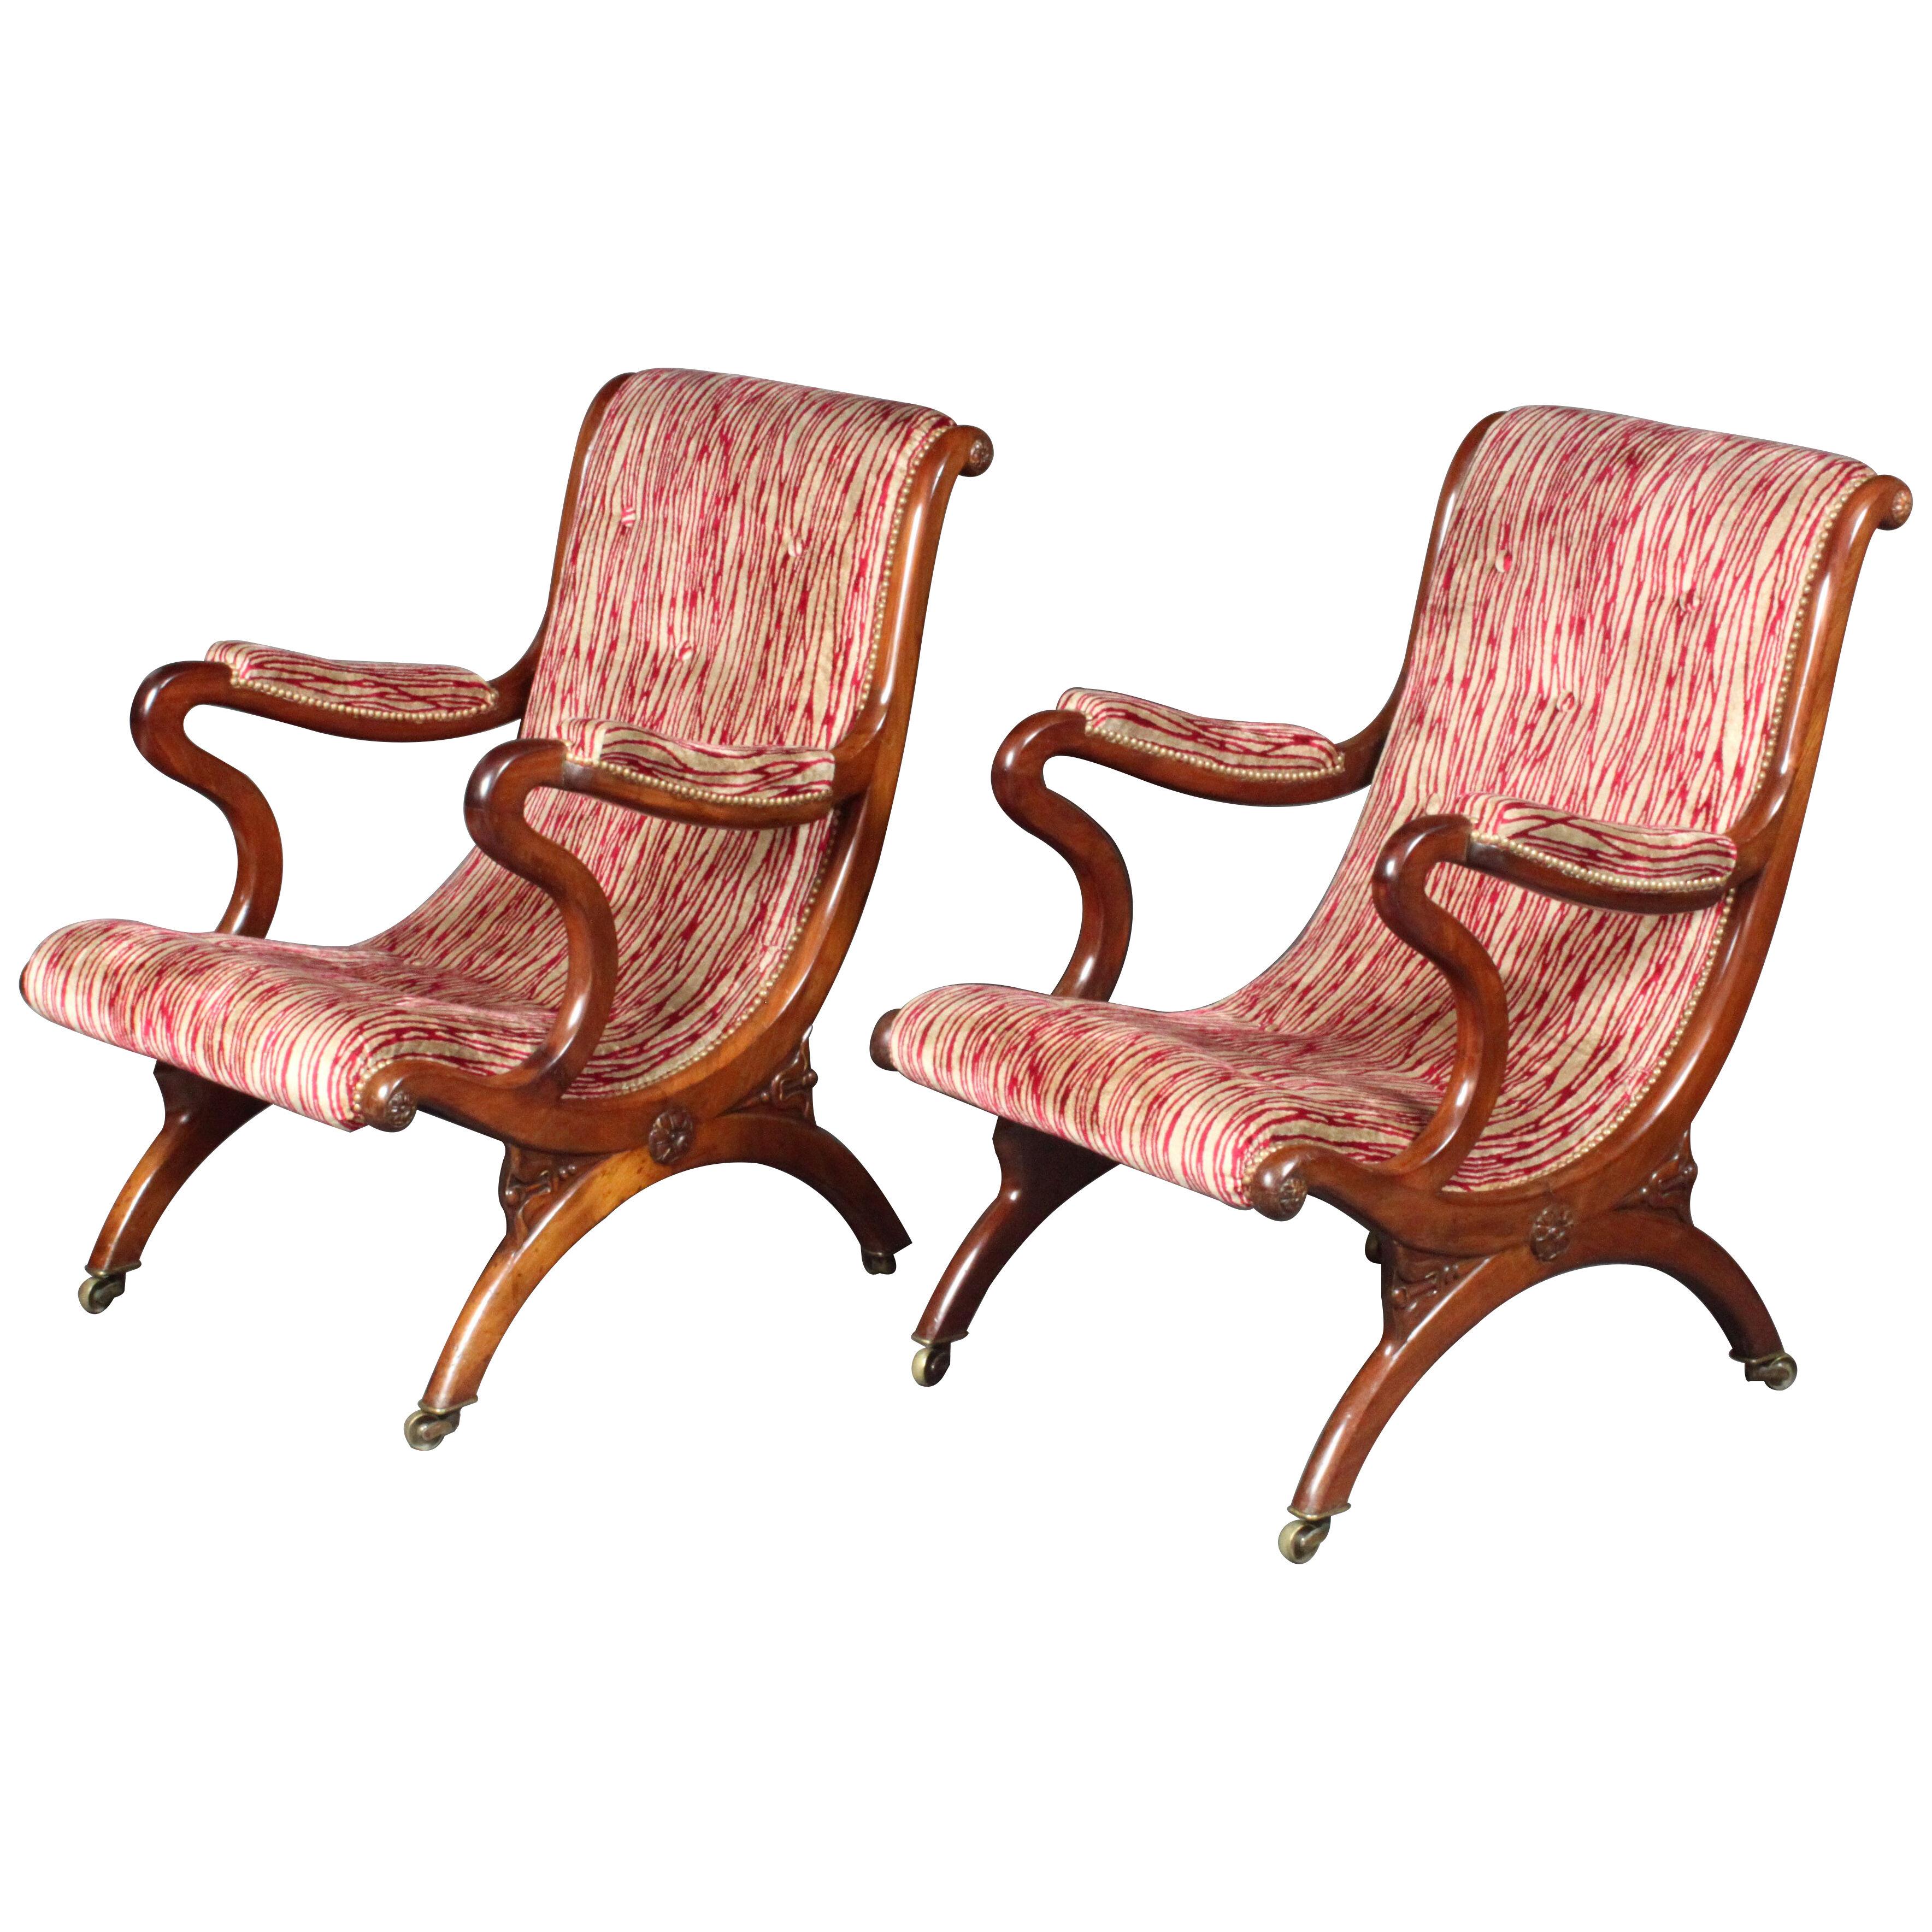 Regency Pair of Armchairs after a Design by Loudon